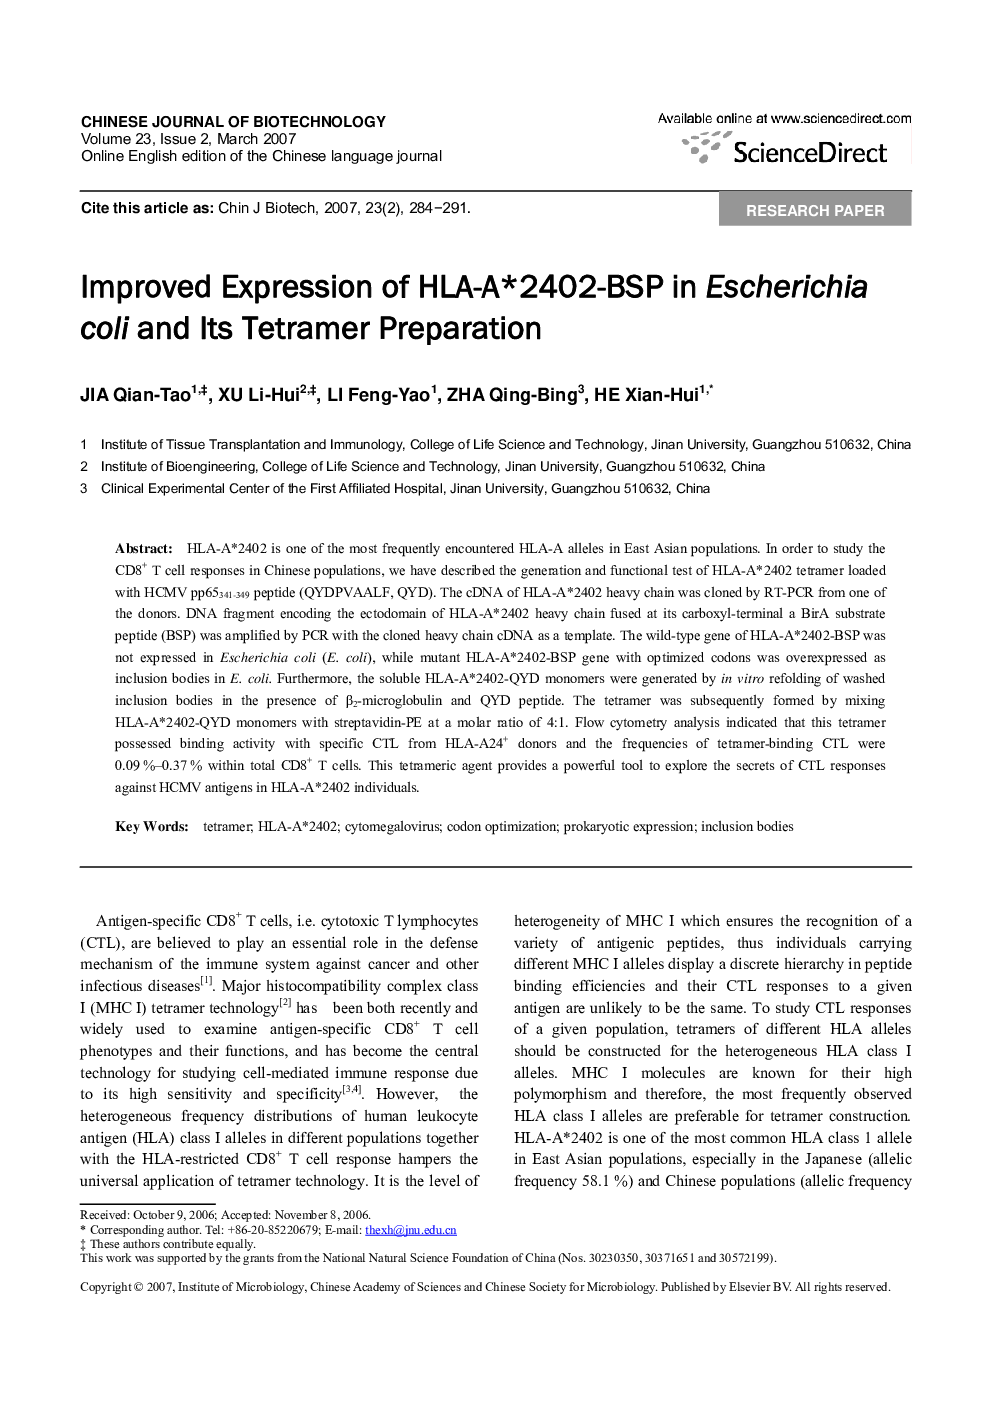 Improved Expression of HLA-A*2402-BSP in Escherichia coli and Its Tetramer Preparation